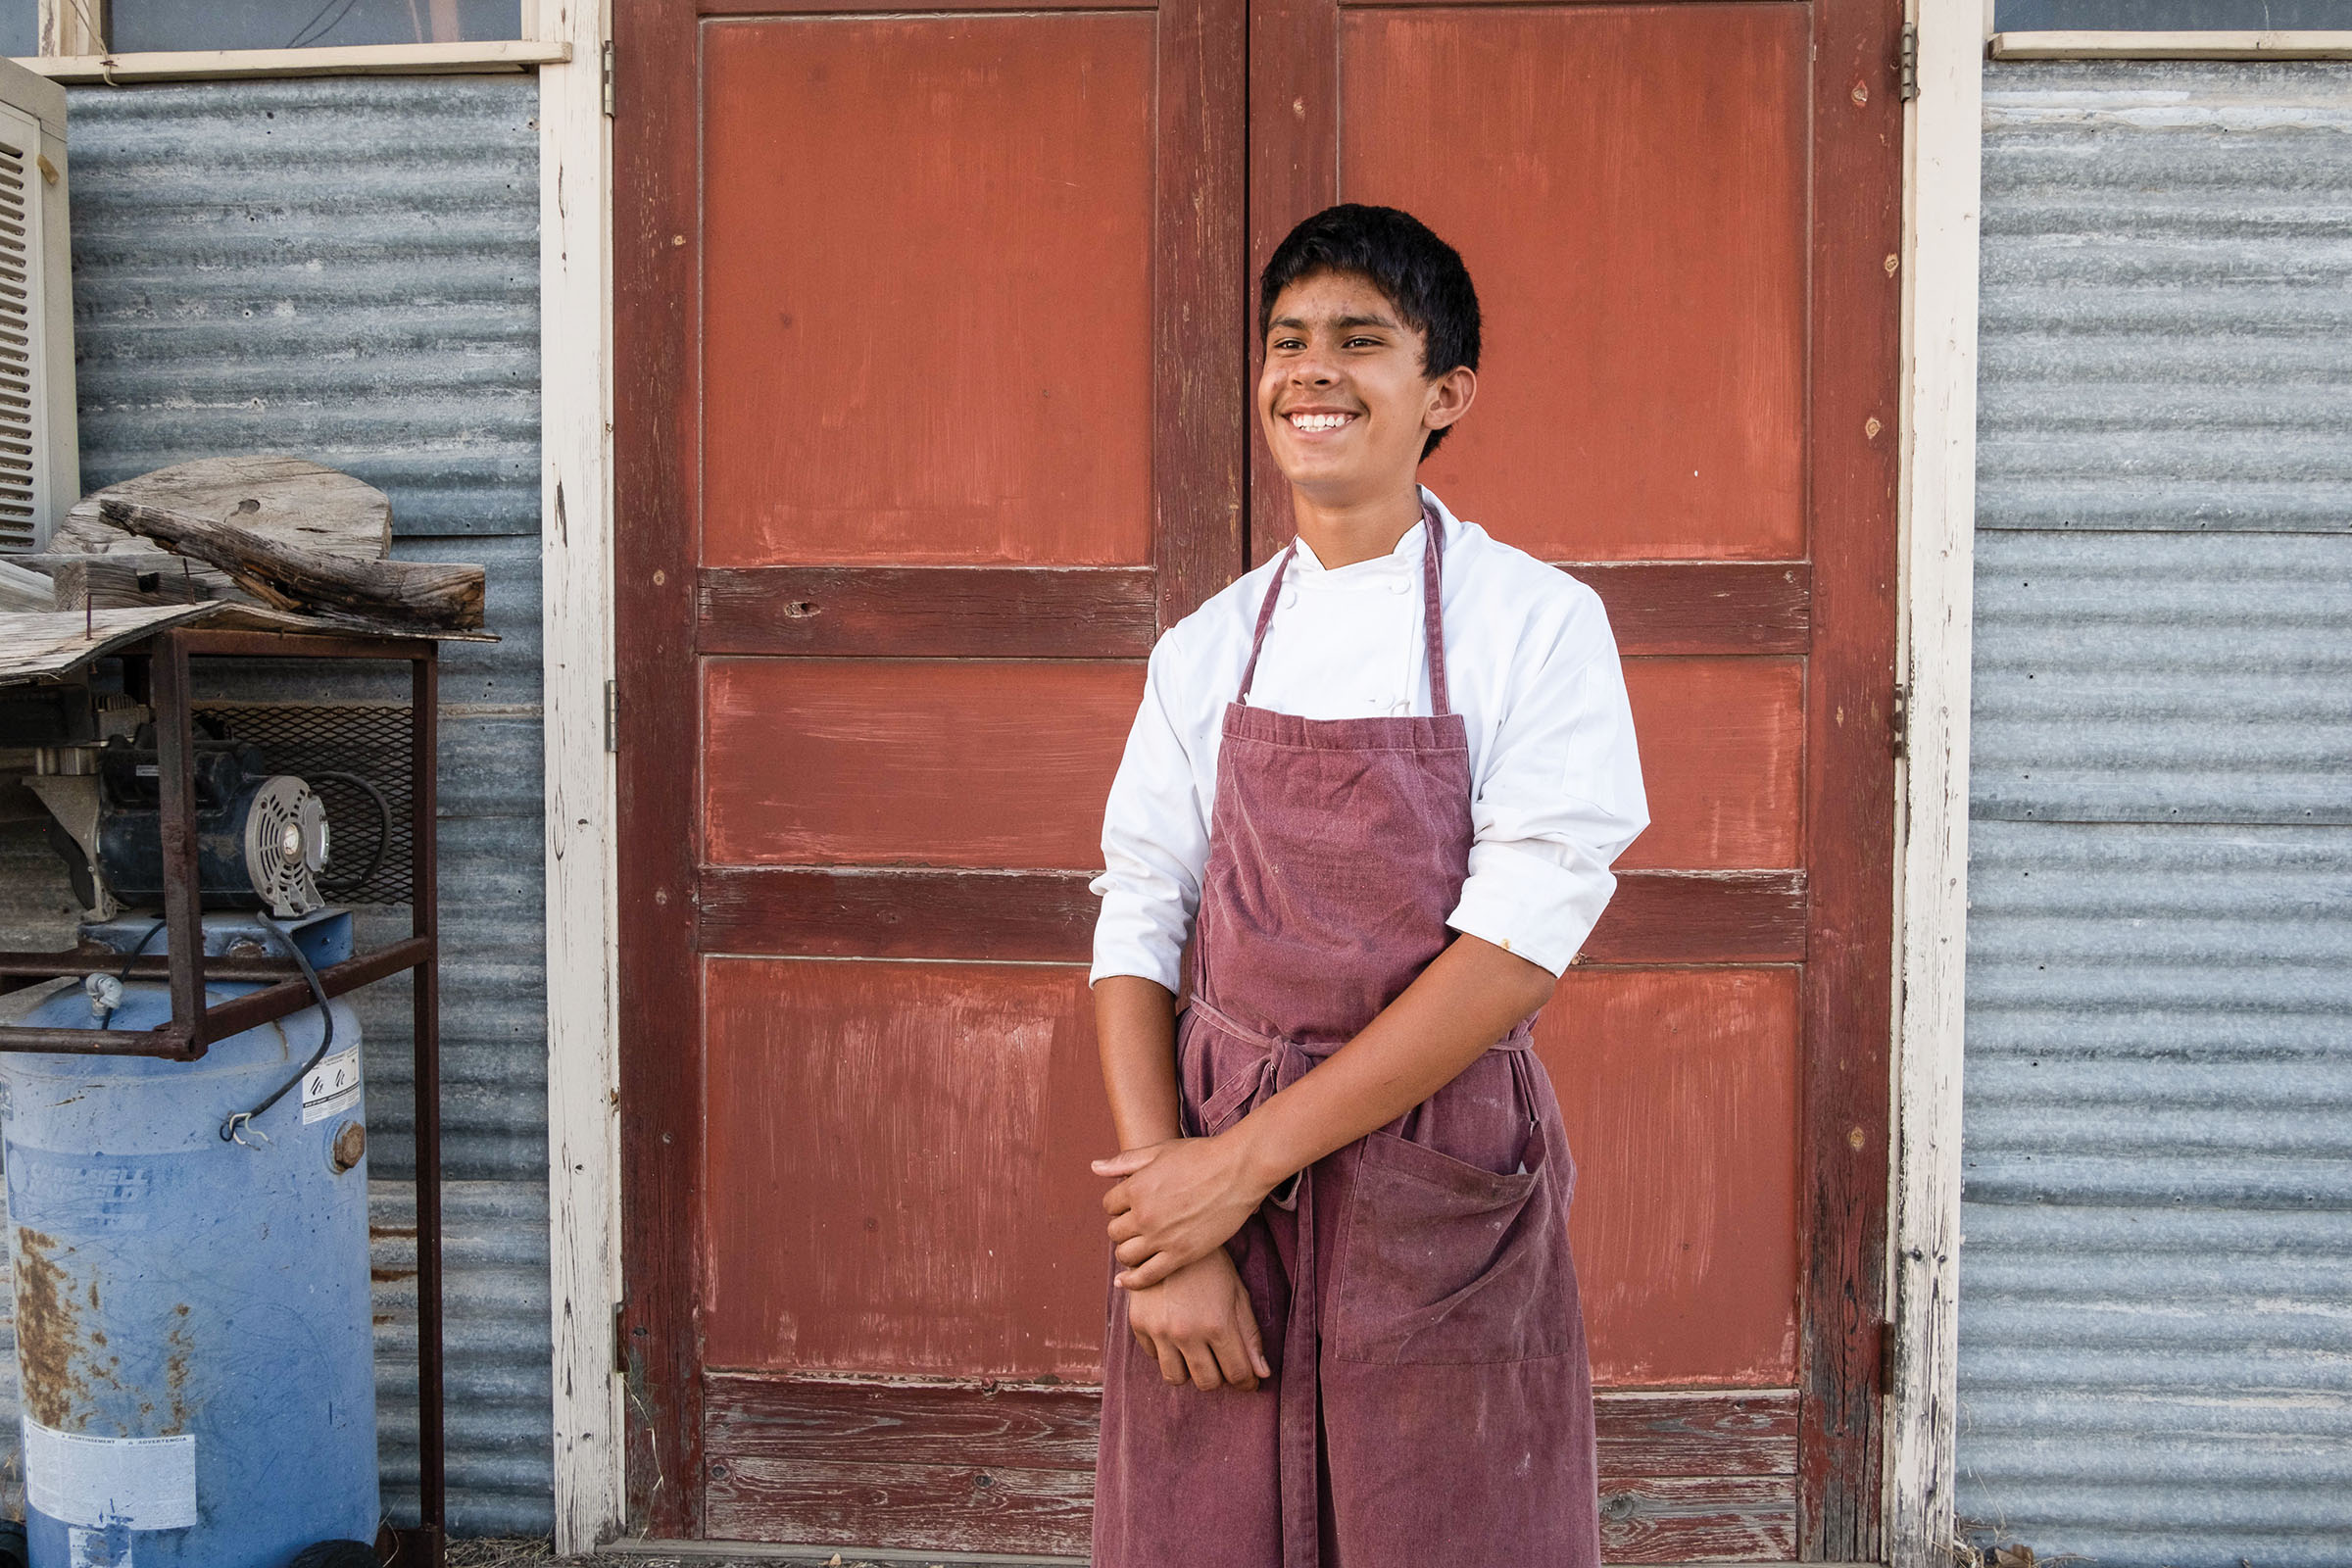 A person in a crisp white shirt and maroon apron smiles with their hands folded in front of a large red door